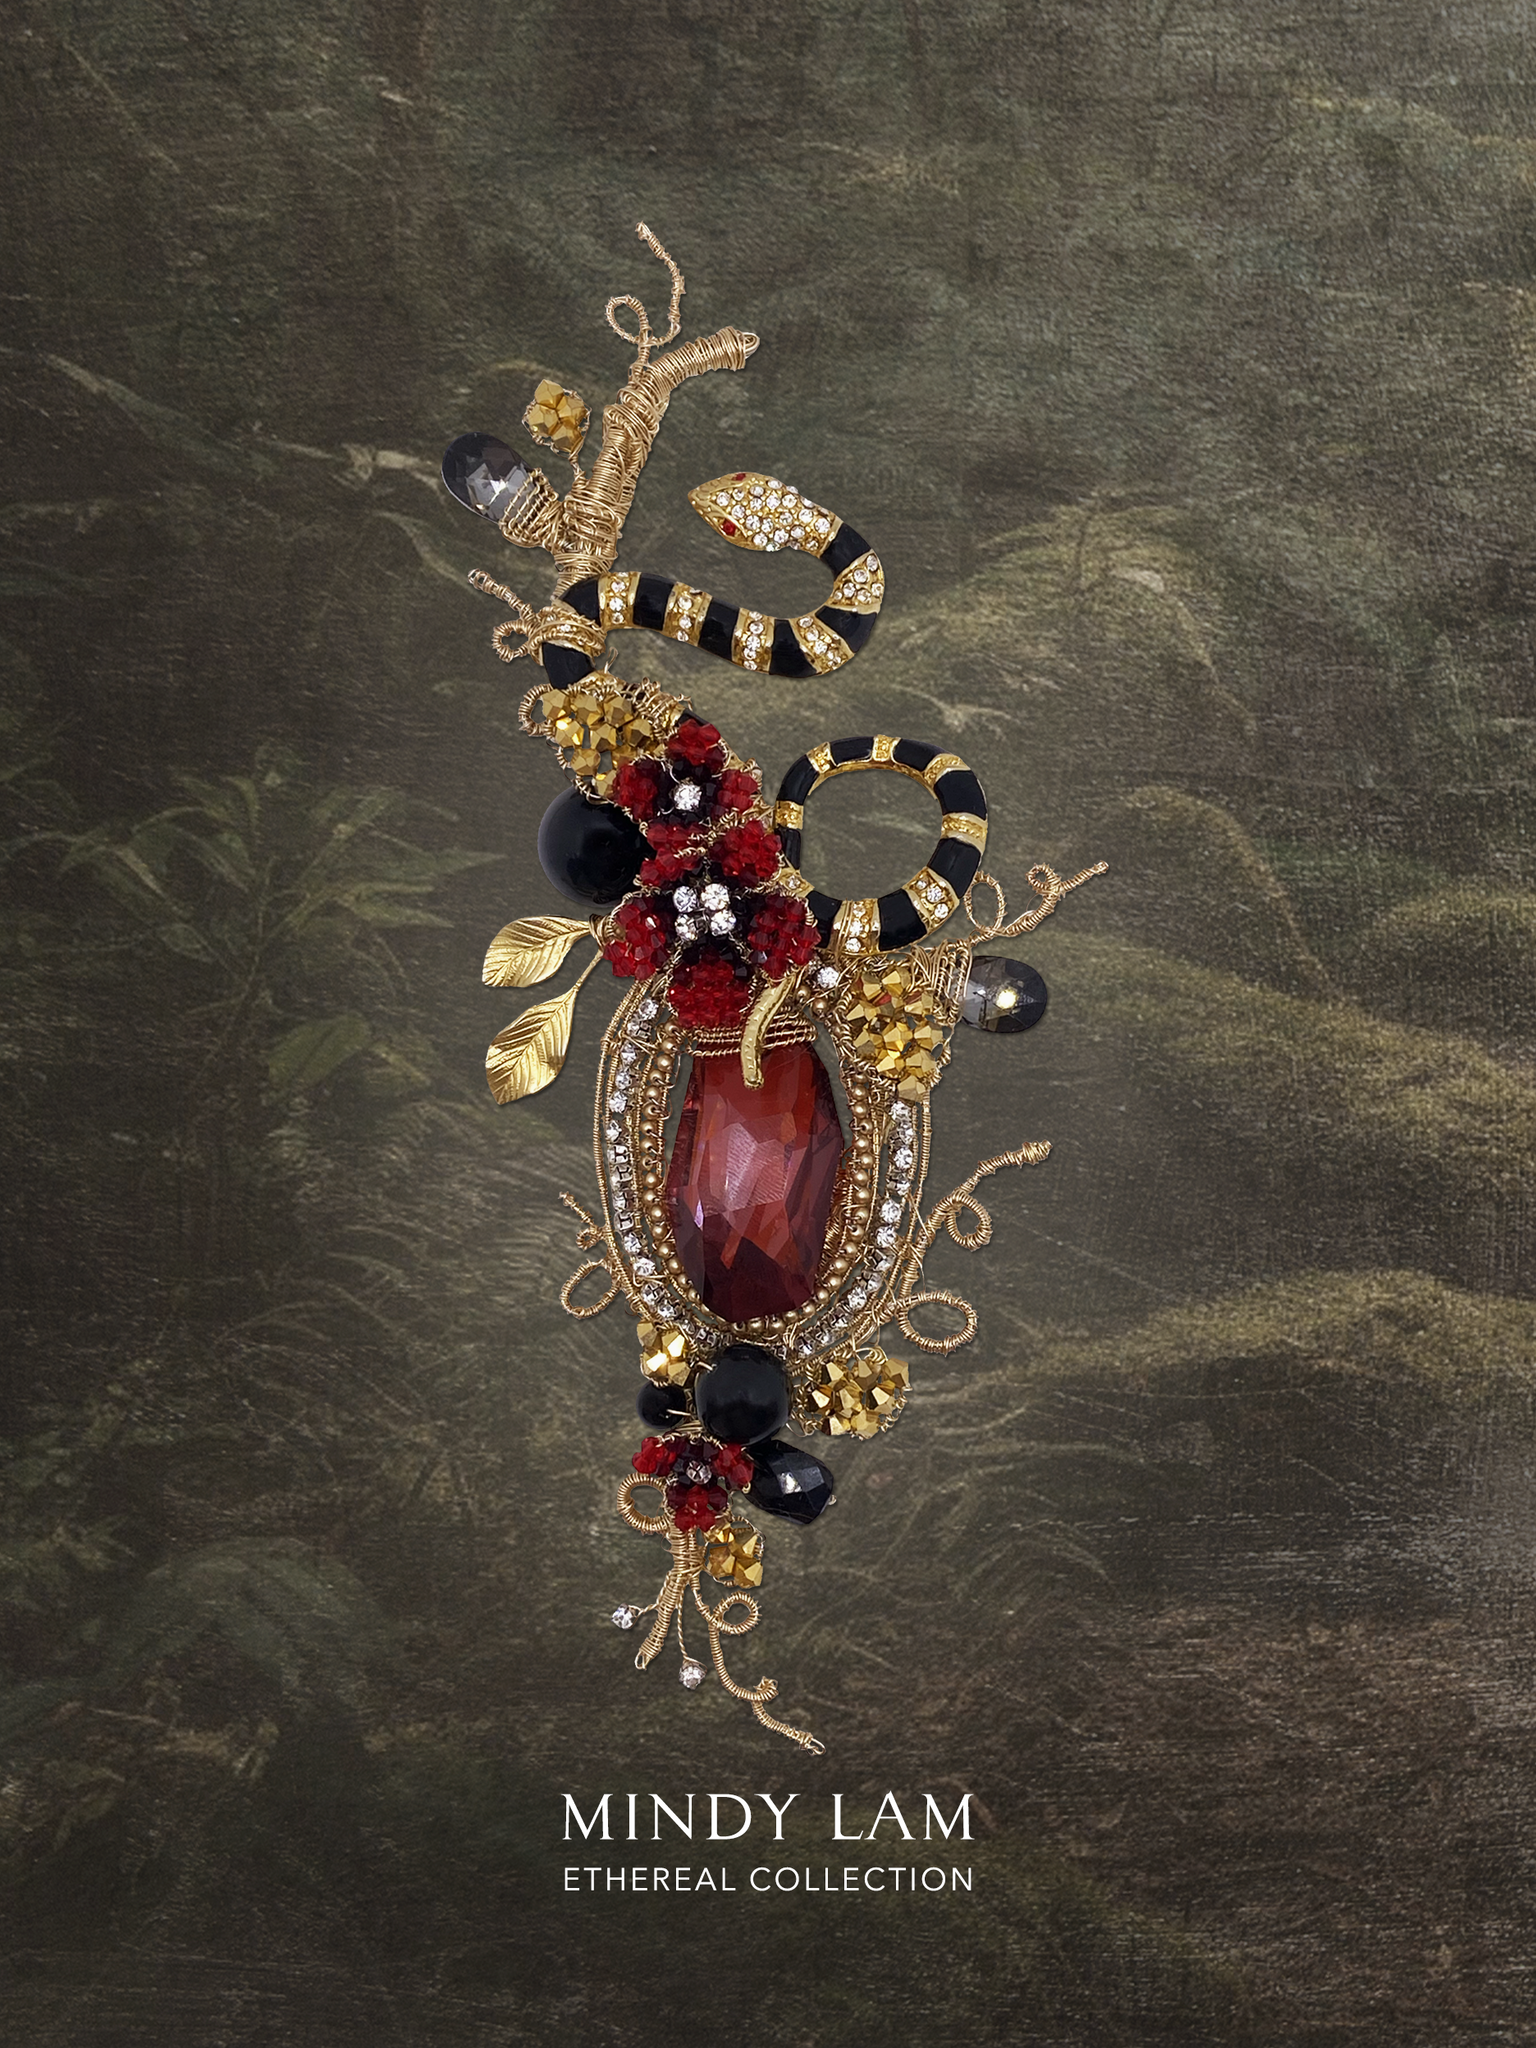 Ethereal Collection Lapel Pin - The Jeweled Serpent